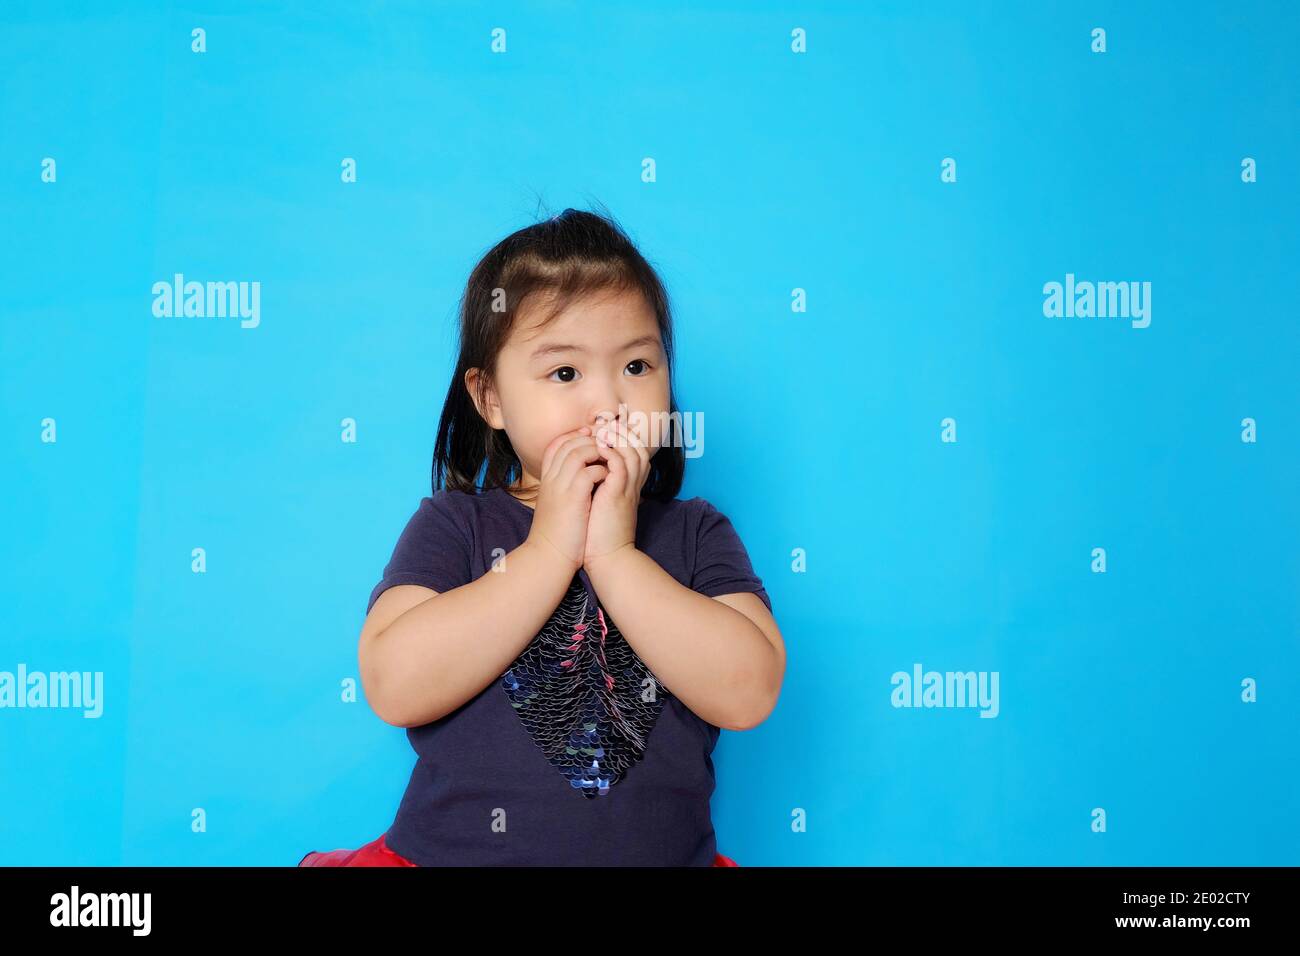 A cute Asian girl covering her mouth with her hands with surprise. Plain light blue background. Stock Photo